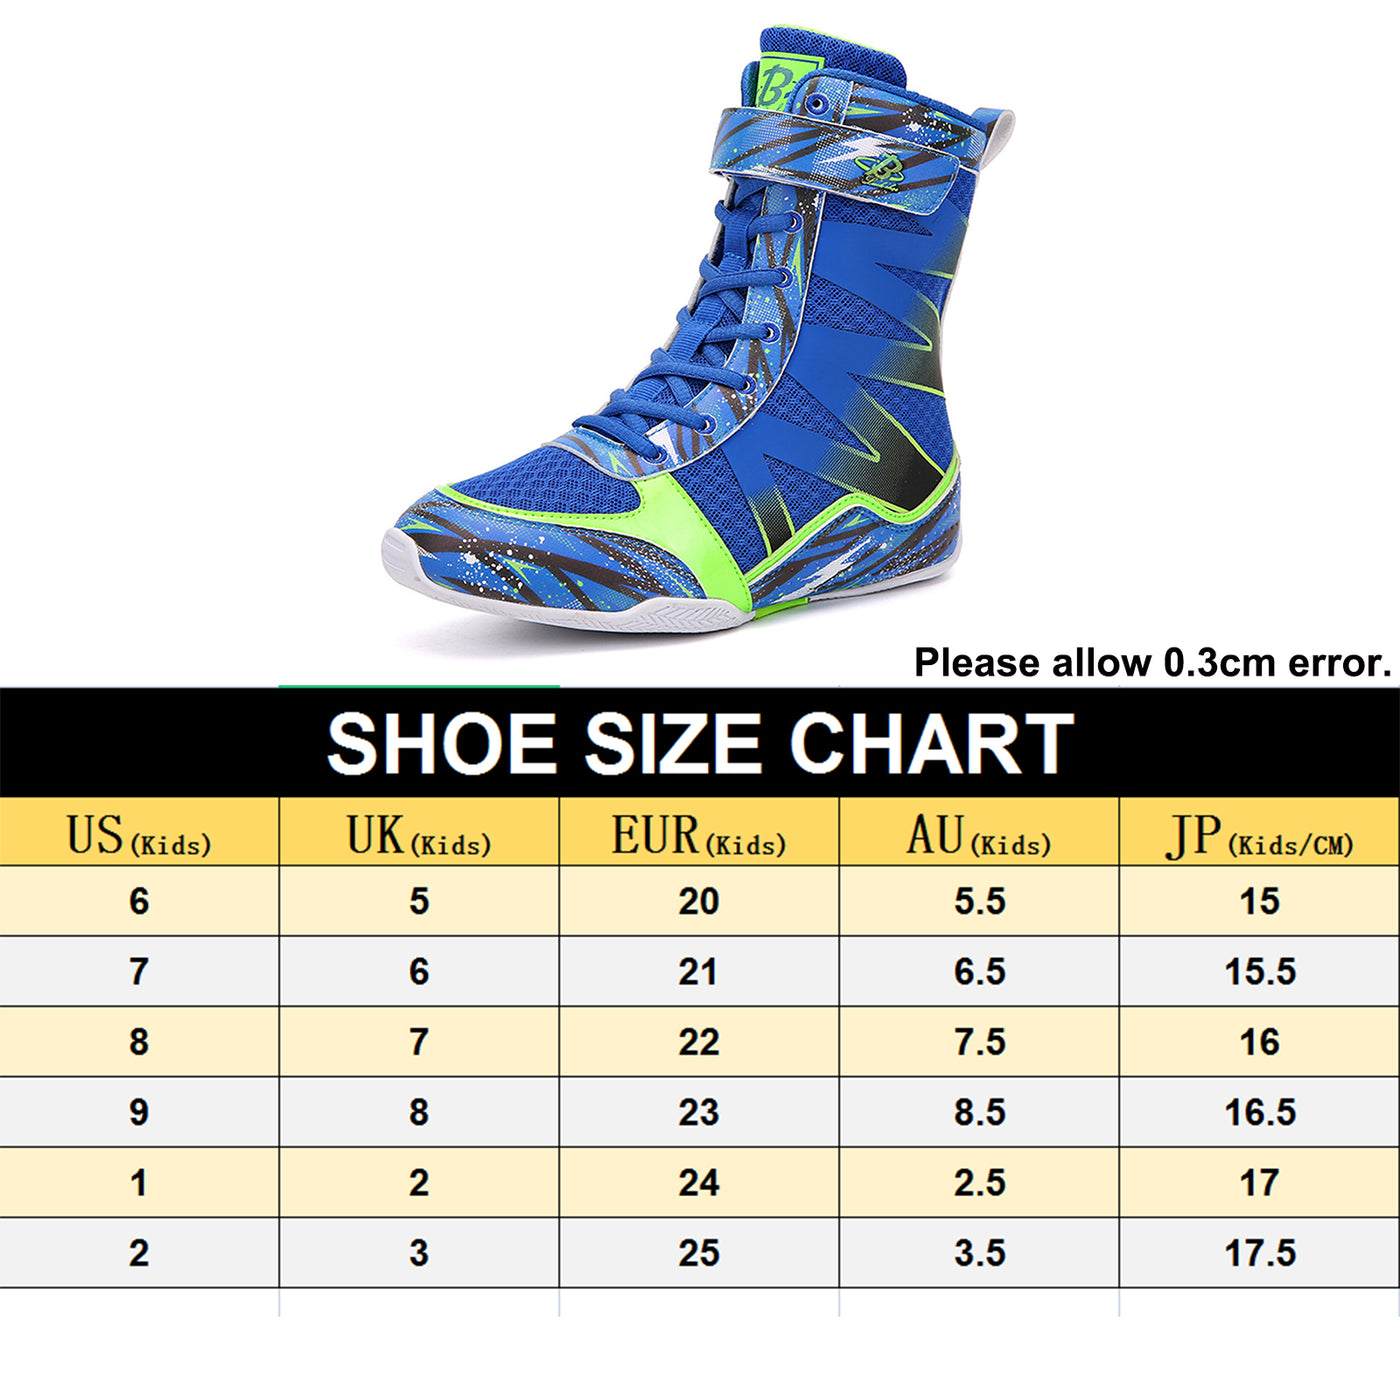 B LUCK SHOE Boxing Shoes for Kids, Youth Boxing Boots Hi-top Breathable Wrestling Shoes LS-218 BLUE